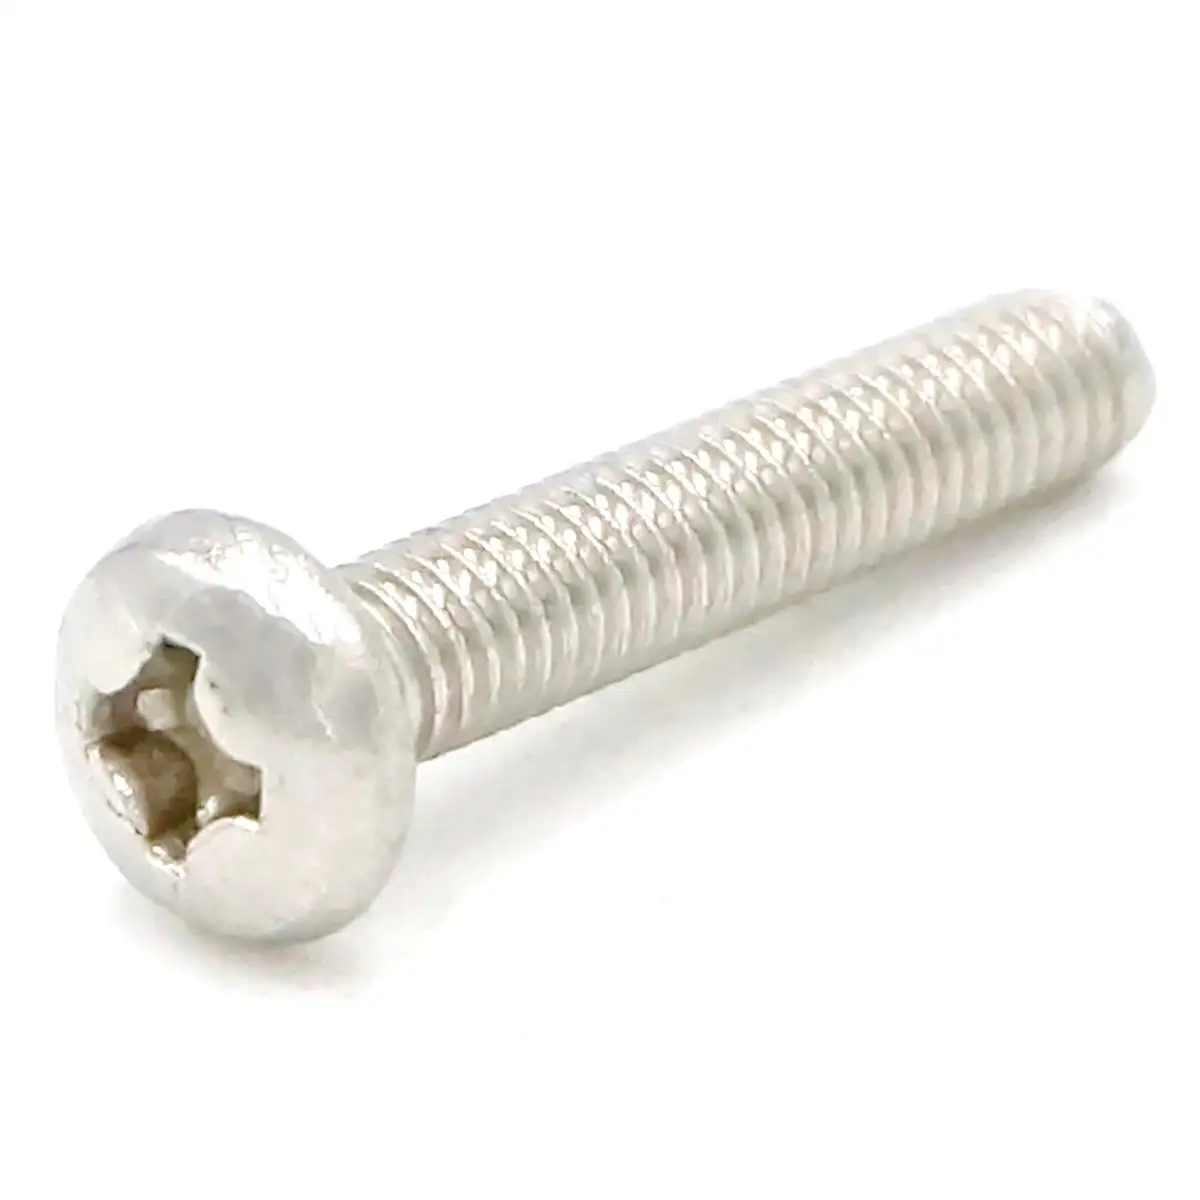 

10pcs M3*16 Pitch 0.5 Phillips Pan Head 304 Stainless Steel Cross Recessed Machine Screws Cap Bolts Nuts